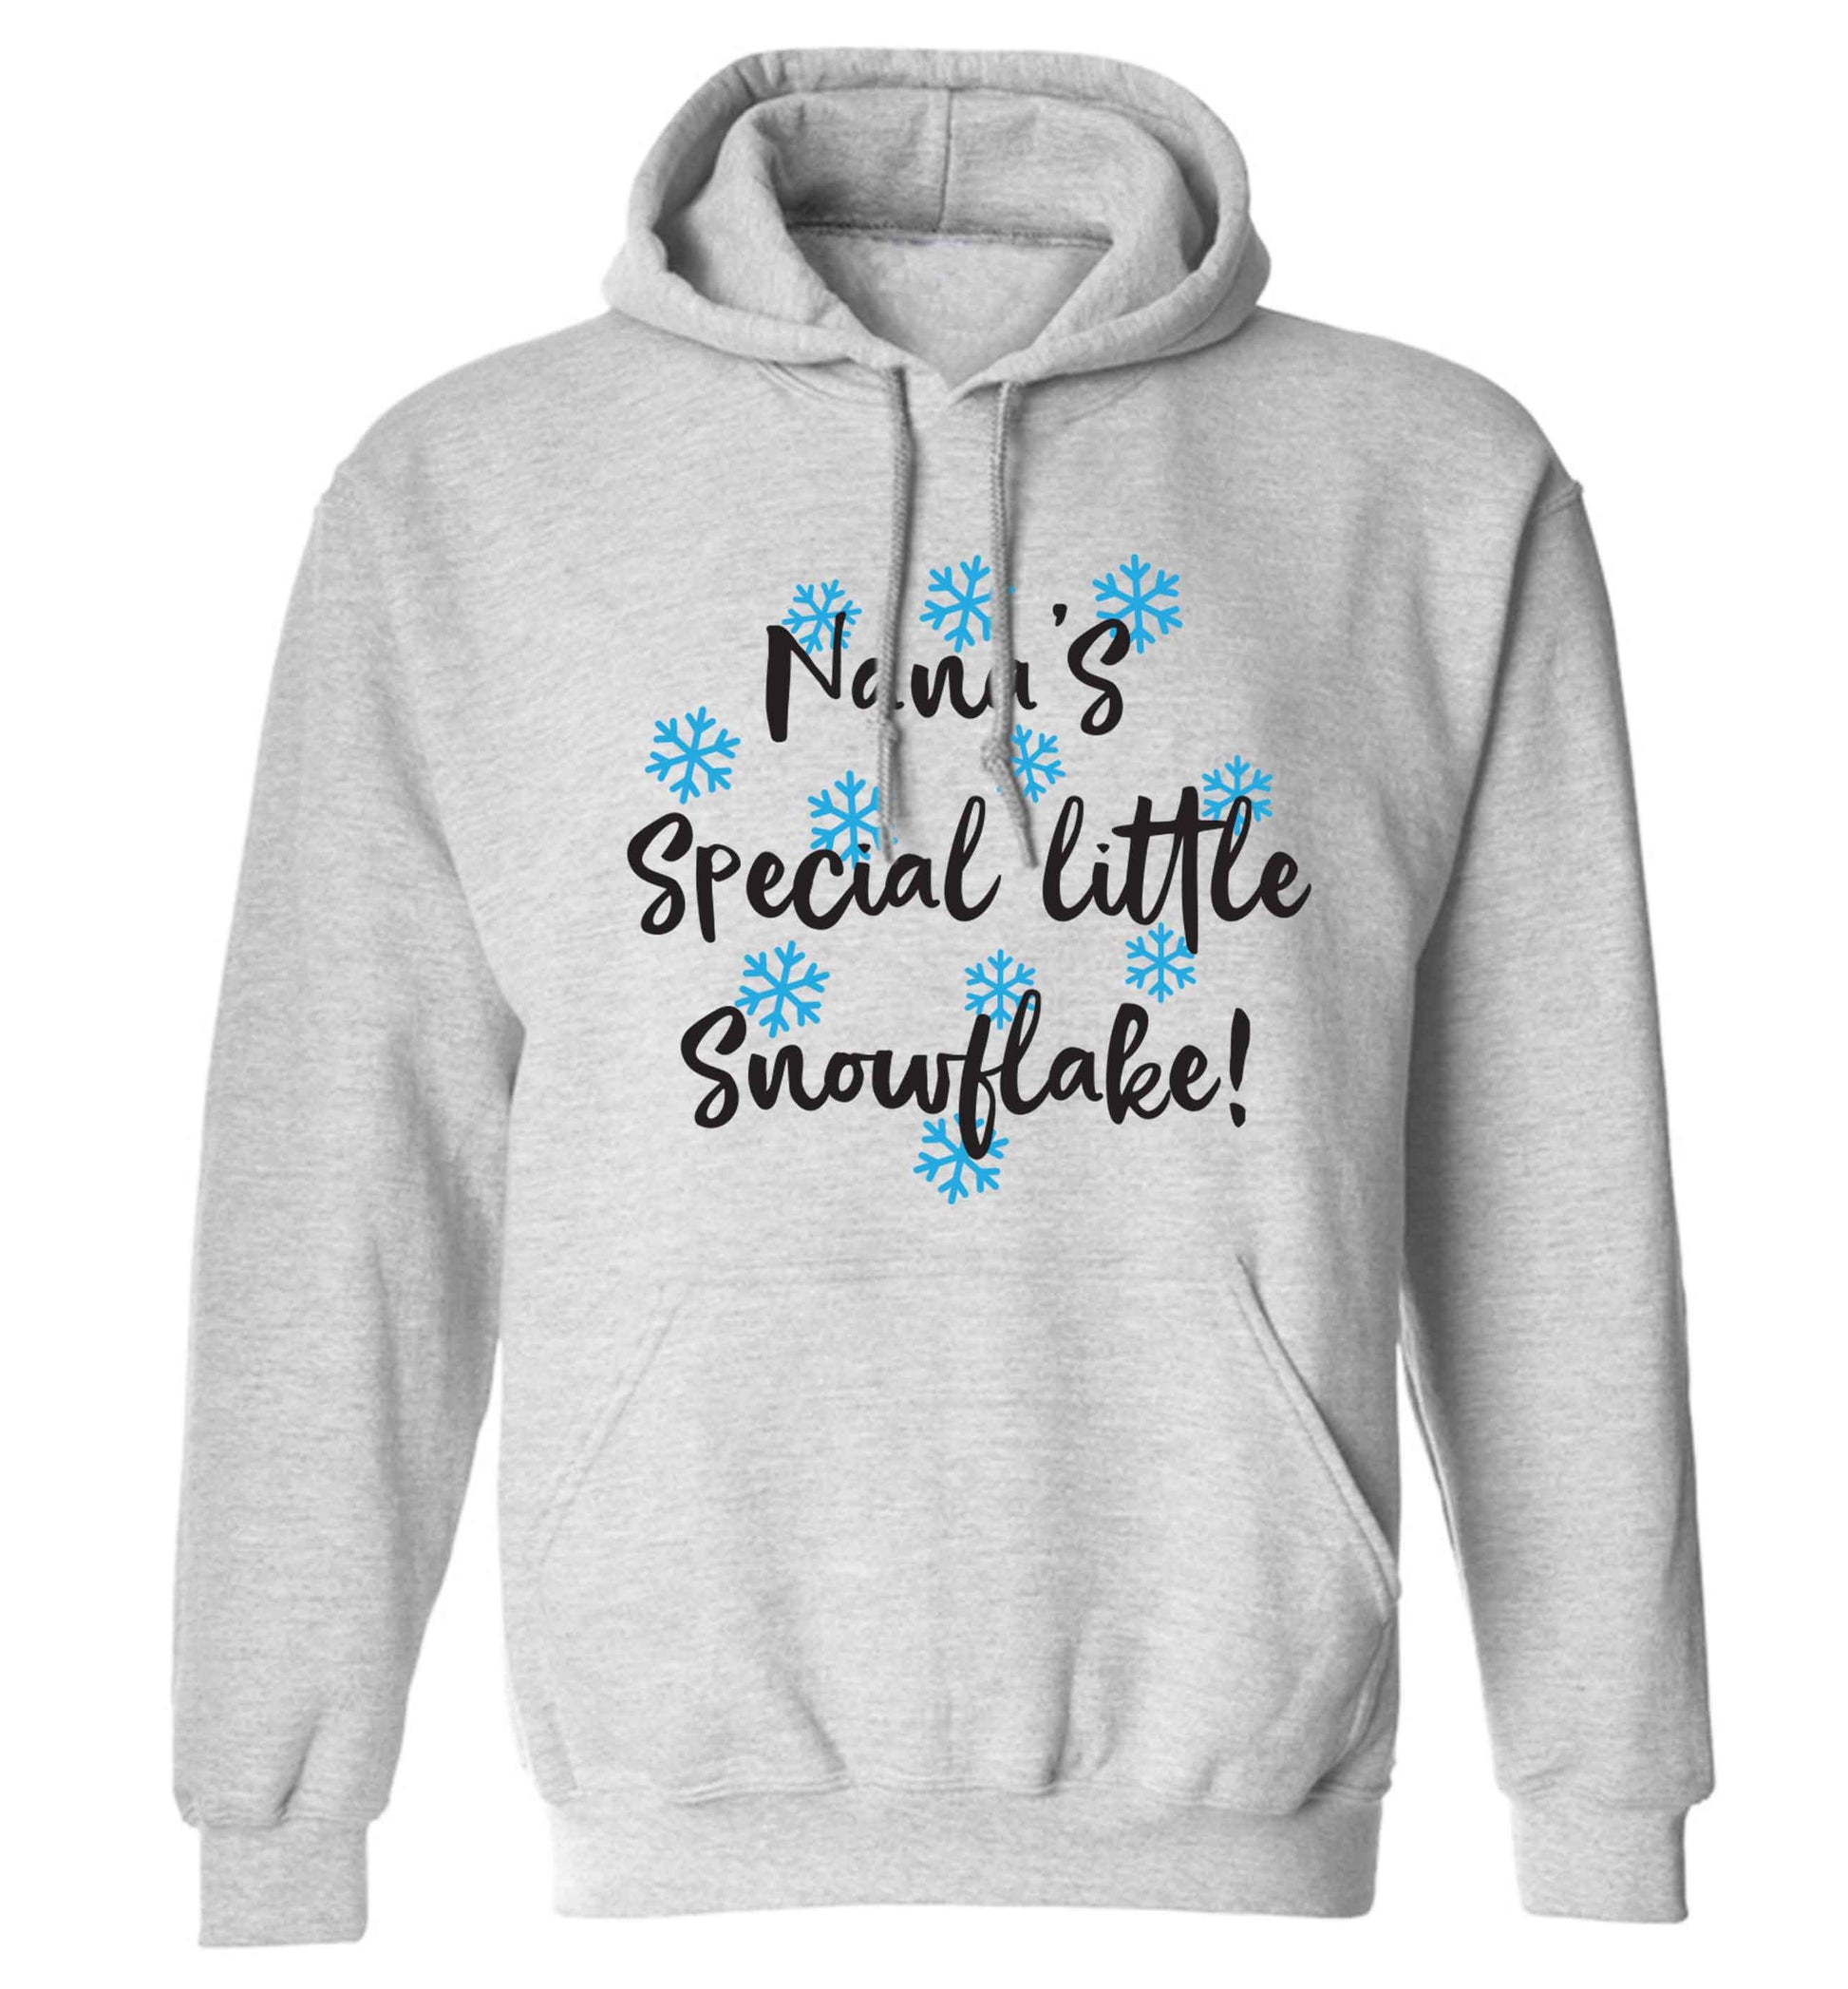 Nana's special little snowflake adults unisex grey hoodie 2XL